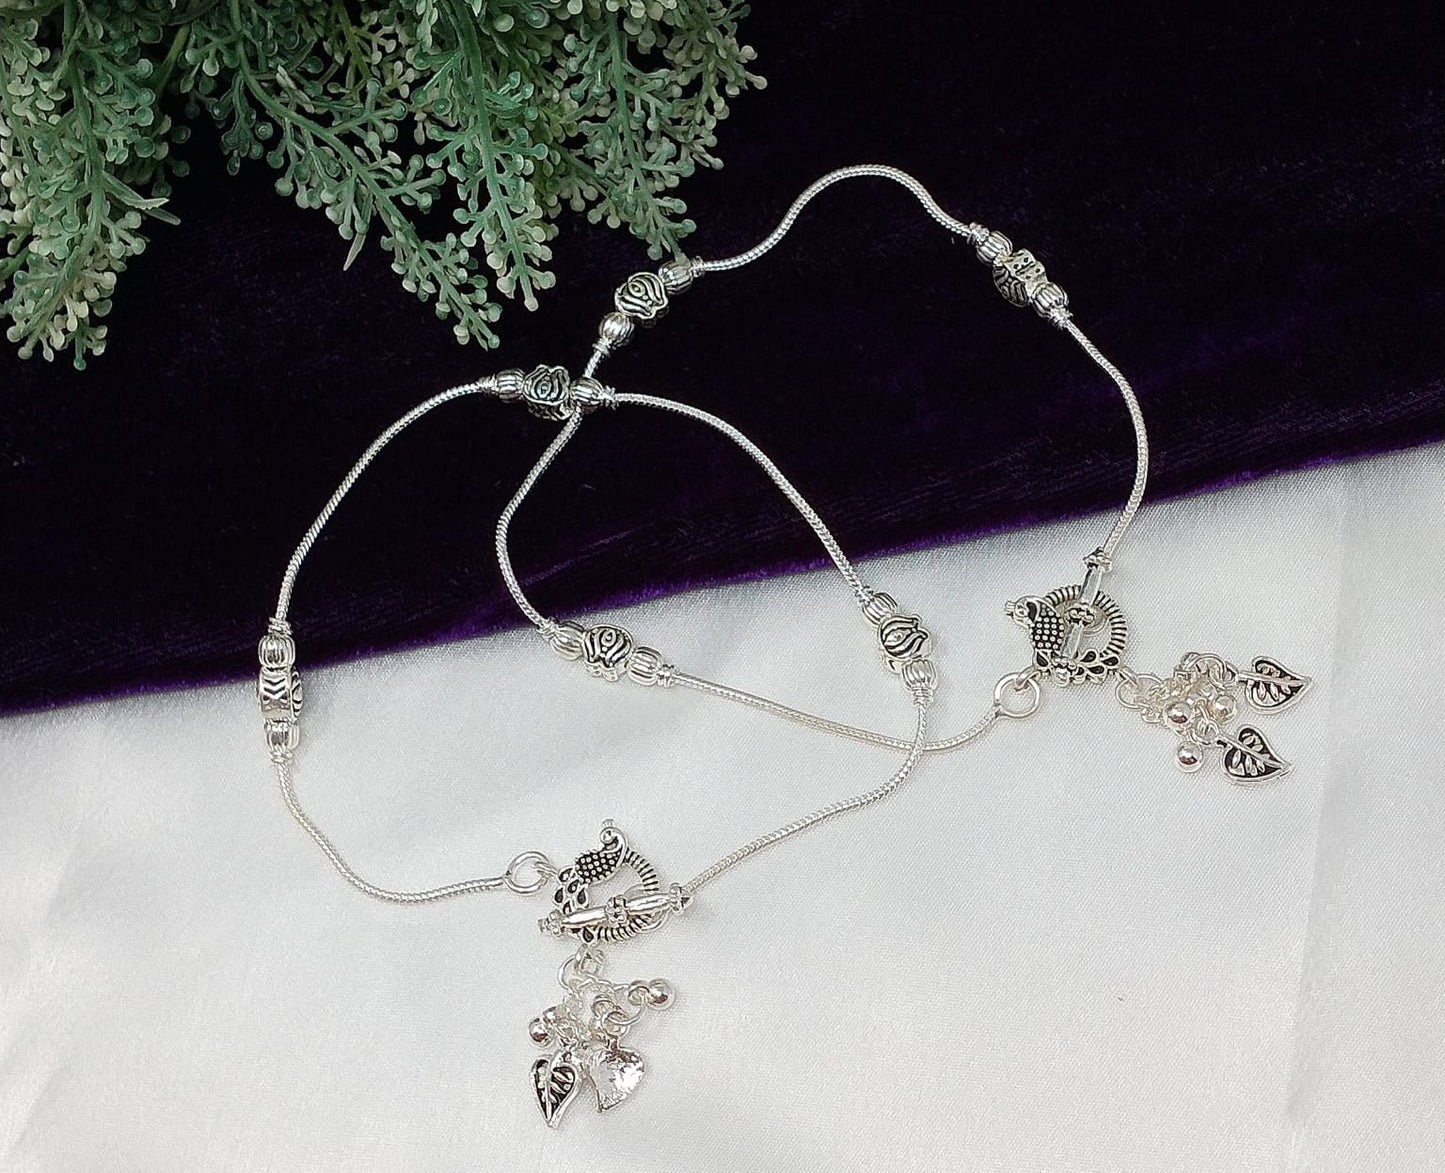 Fashionista Silver Plated Anklets